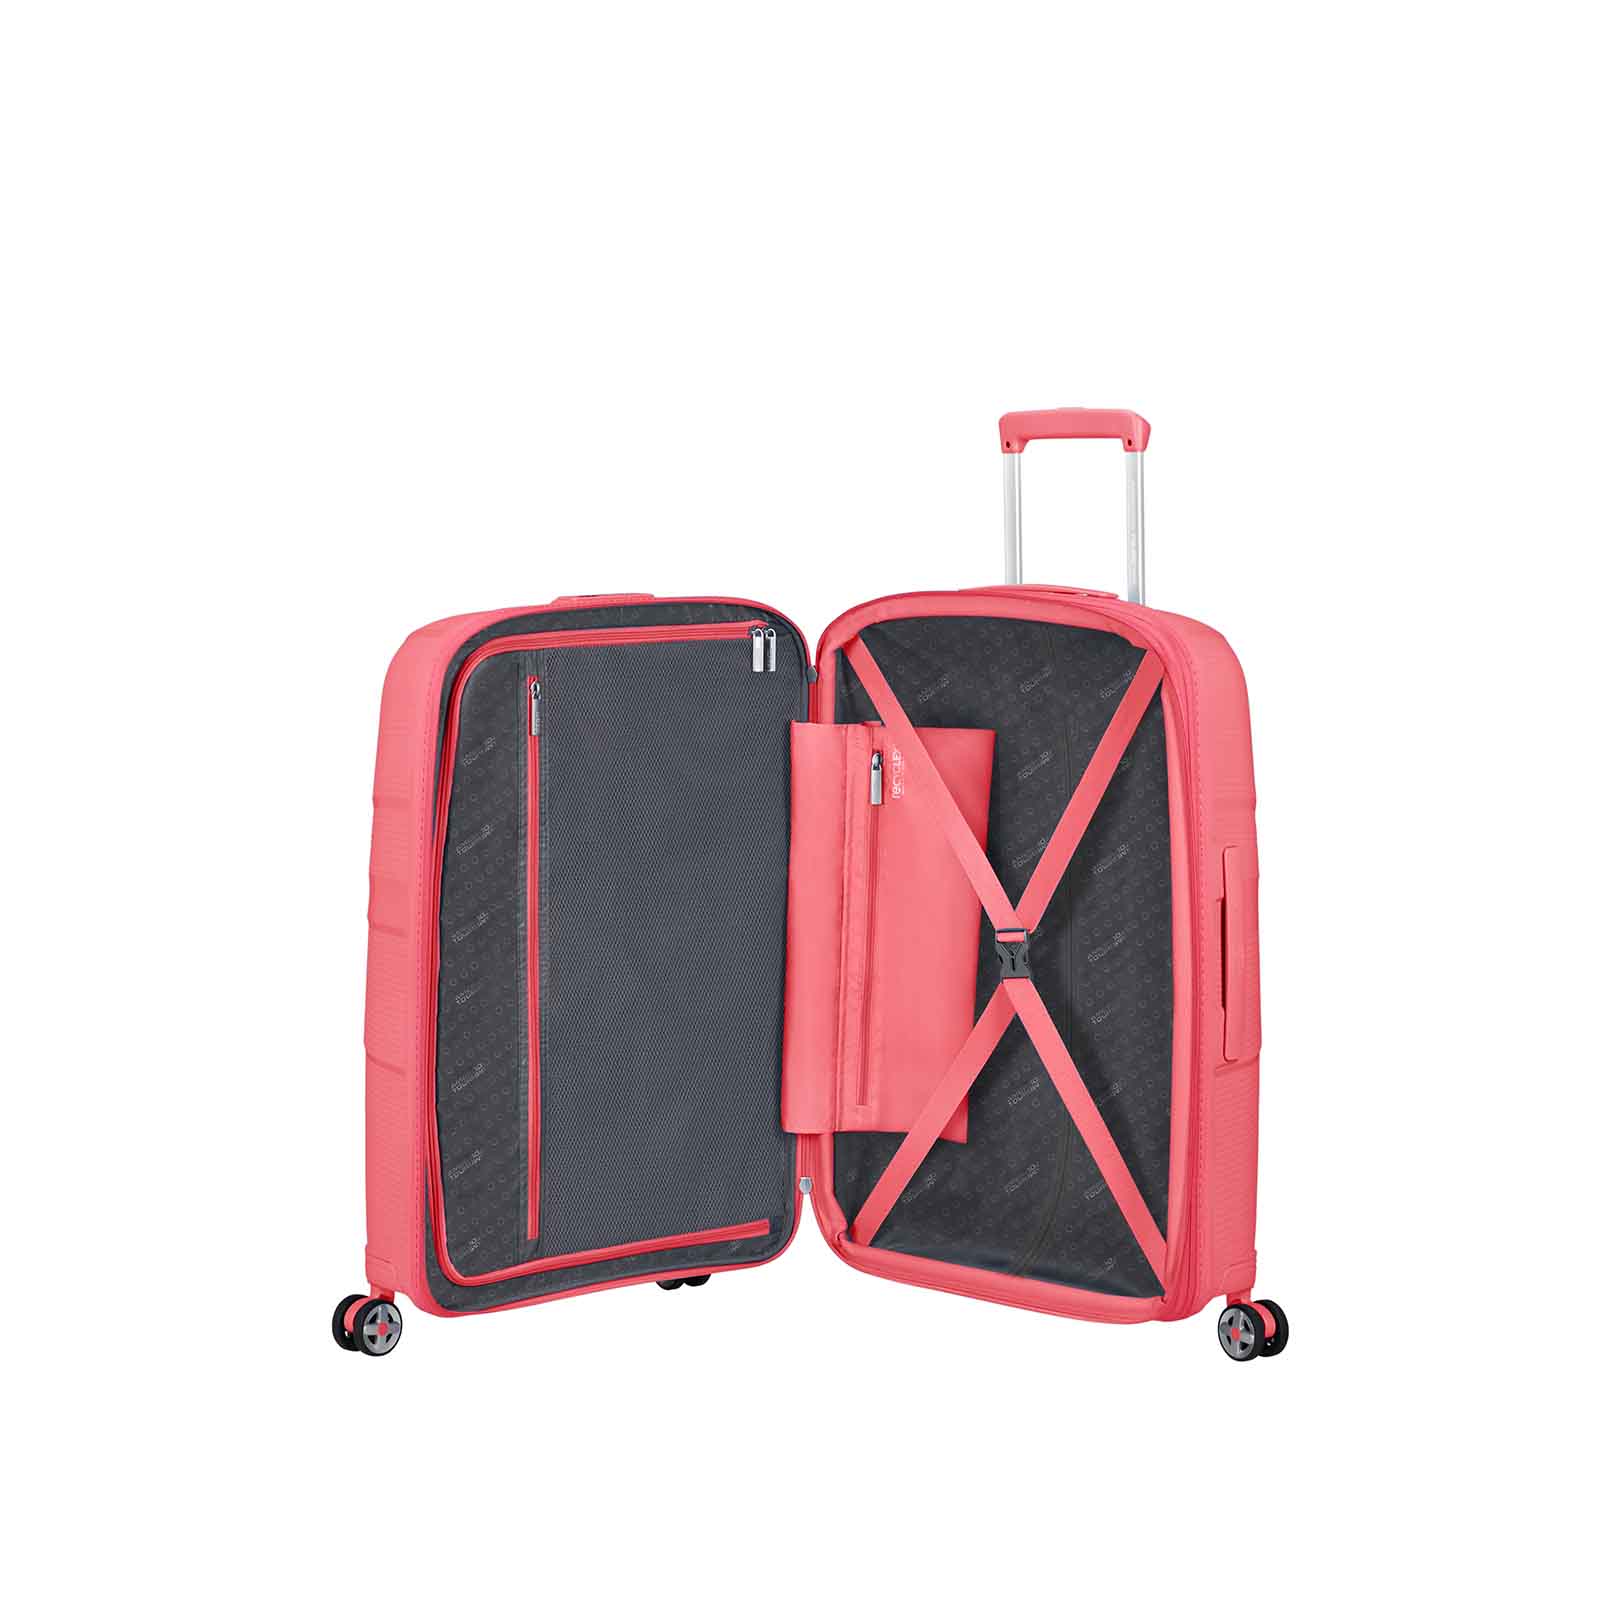 American-Tourister-Starvibe-67cm-Suitcase-Coral-Open